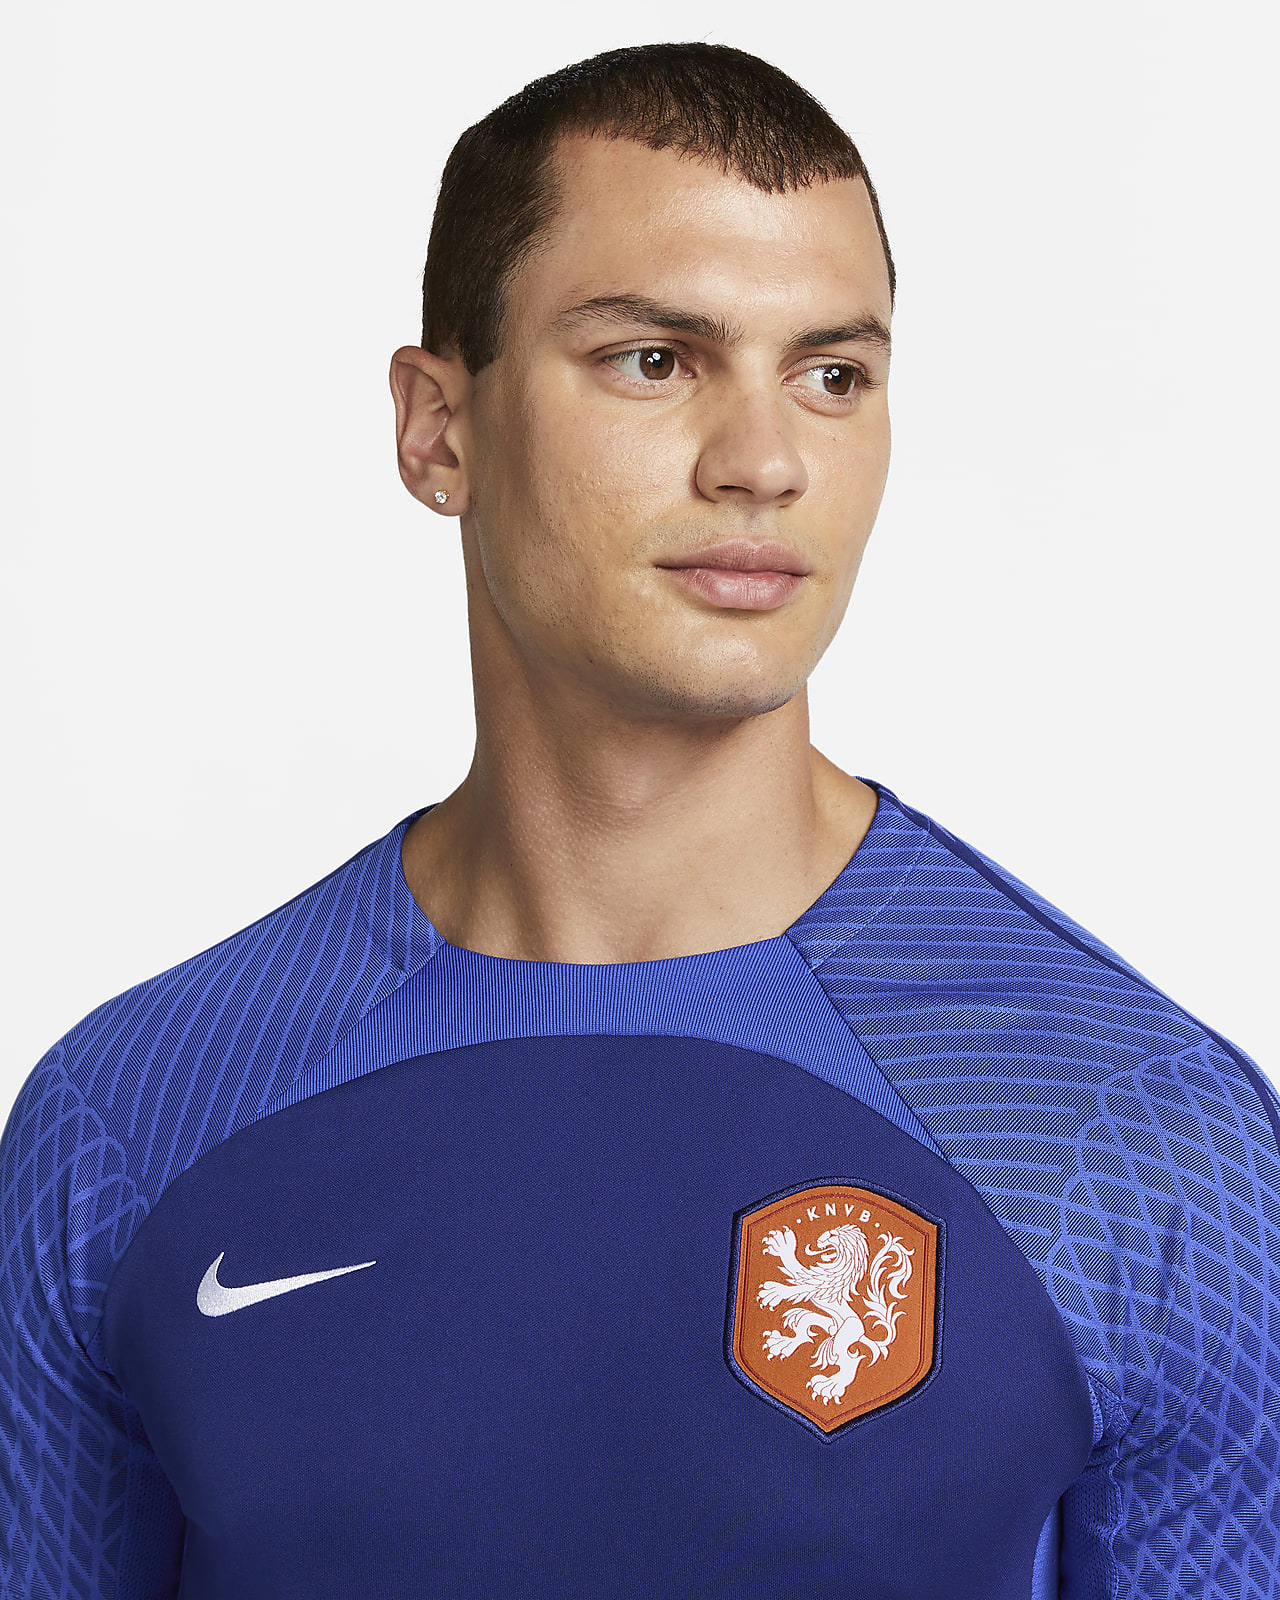 Nike Football - Equipped to strike fear into opponents, the new Netherlands  2012/13 away jersey shows the ruthless side of the Oranje. Total  performance meets total football. Get the jersey worldwide from